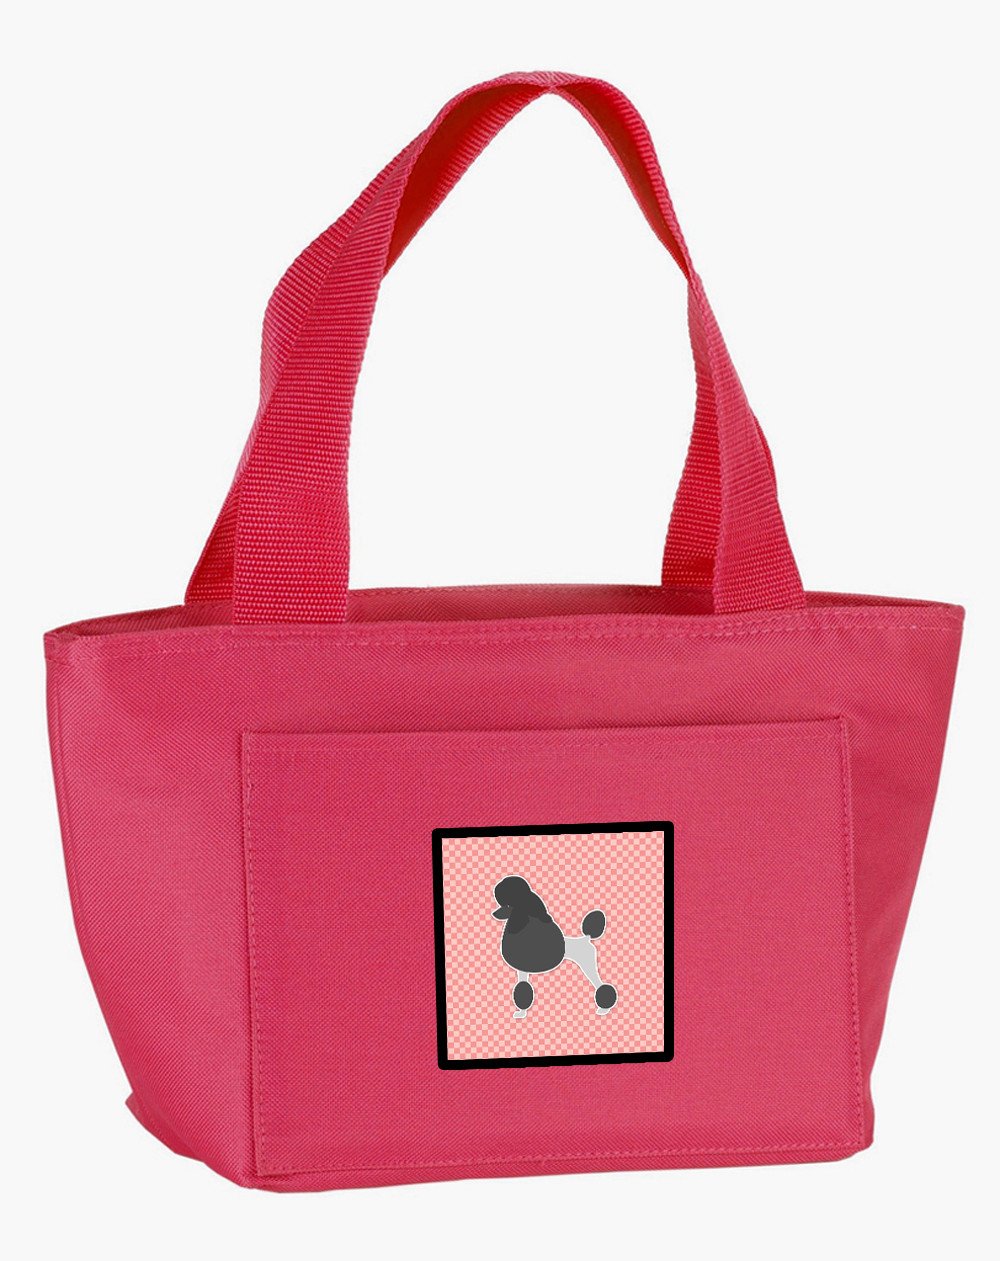 Poodle Checkerboard Pink Lunch Bag BB3639PK-8808 by Caroline's Treasures